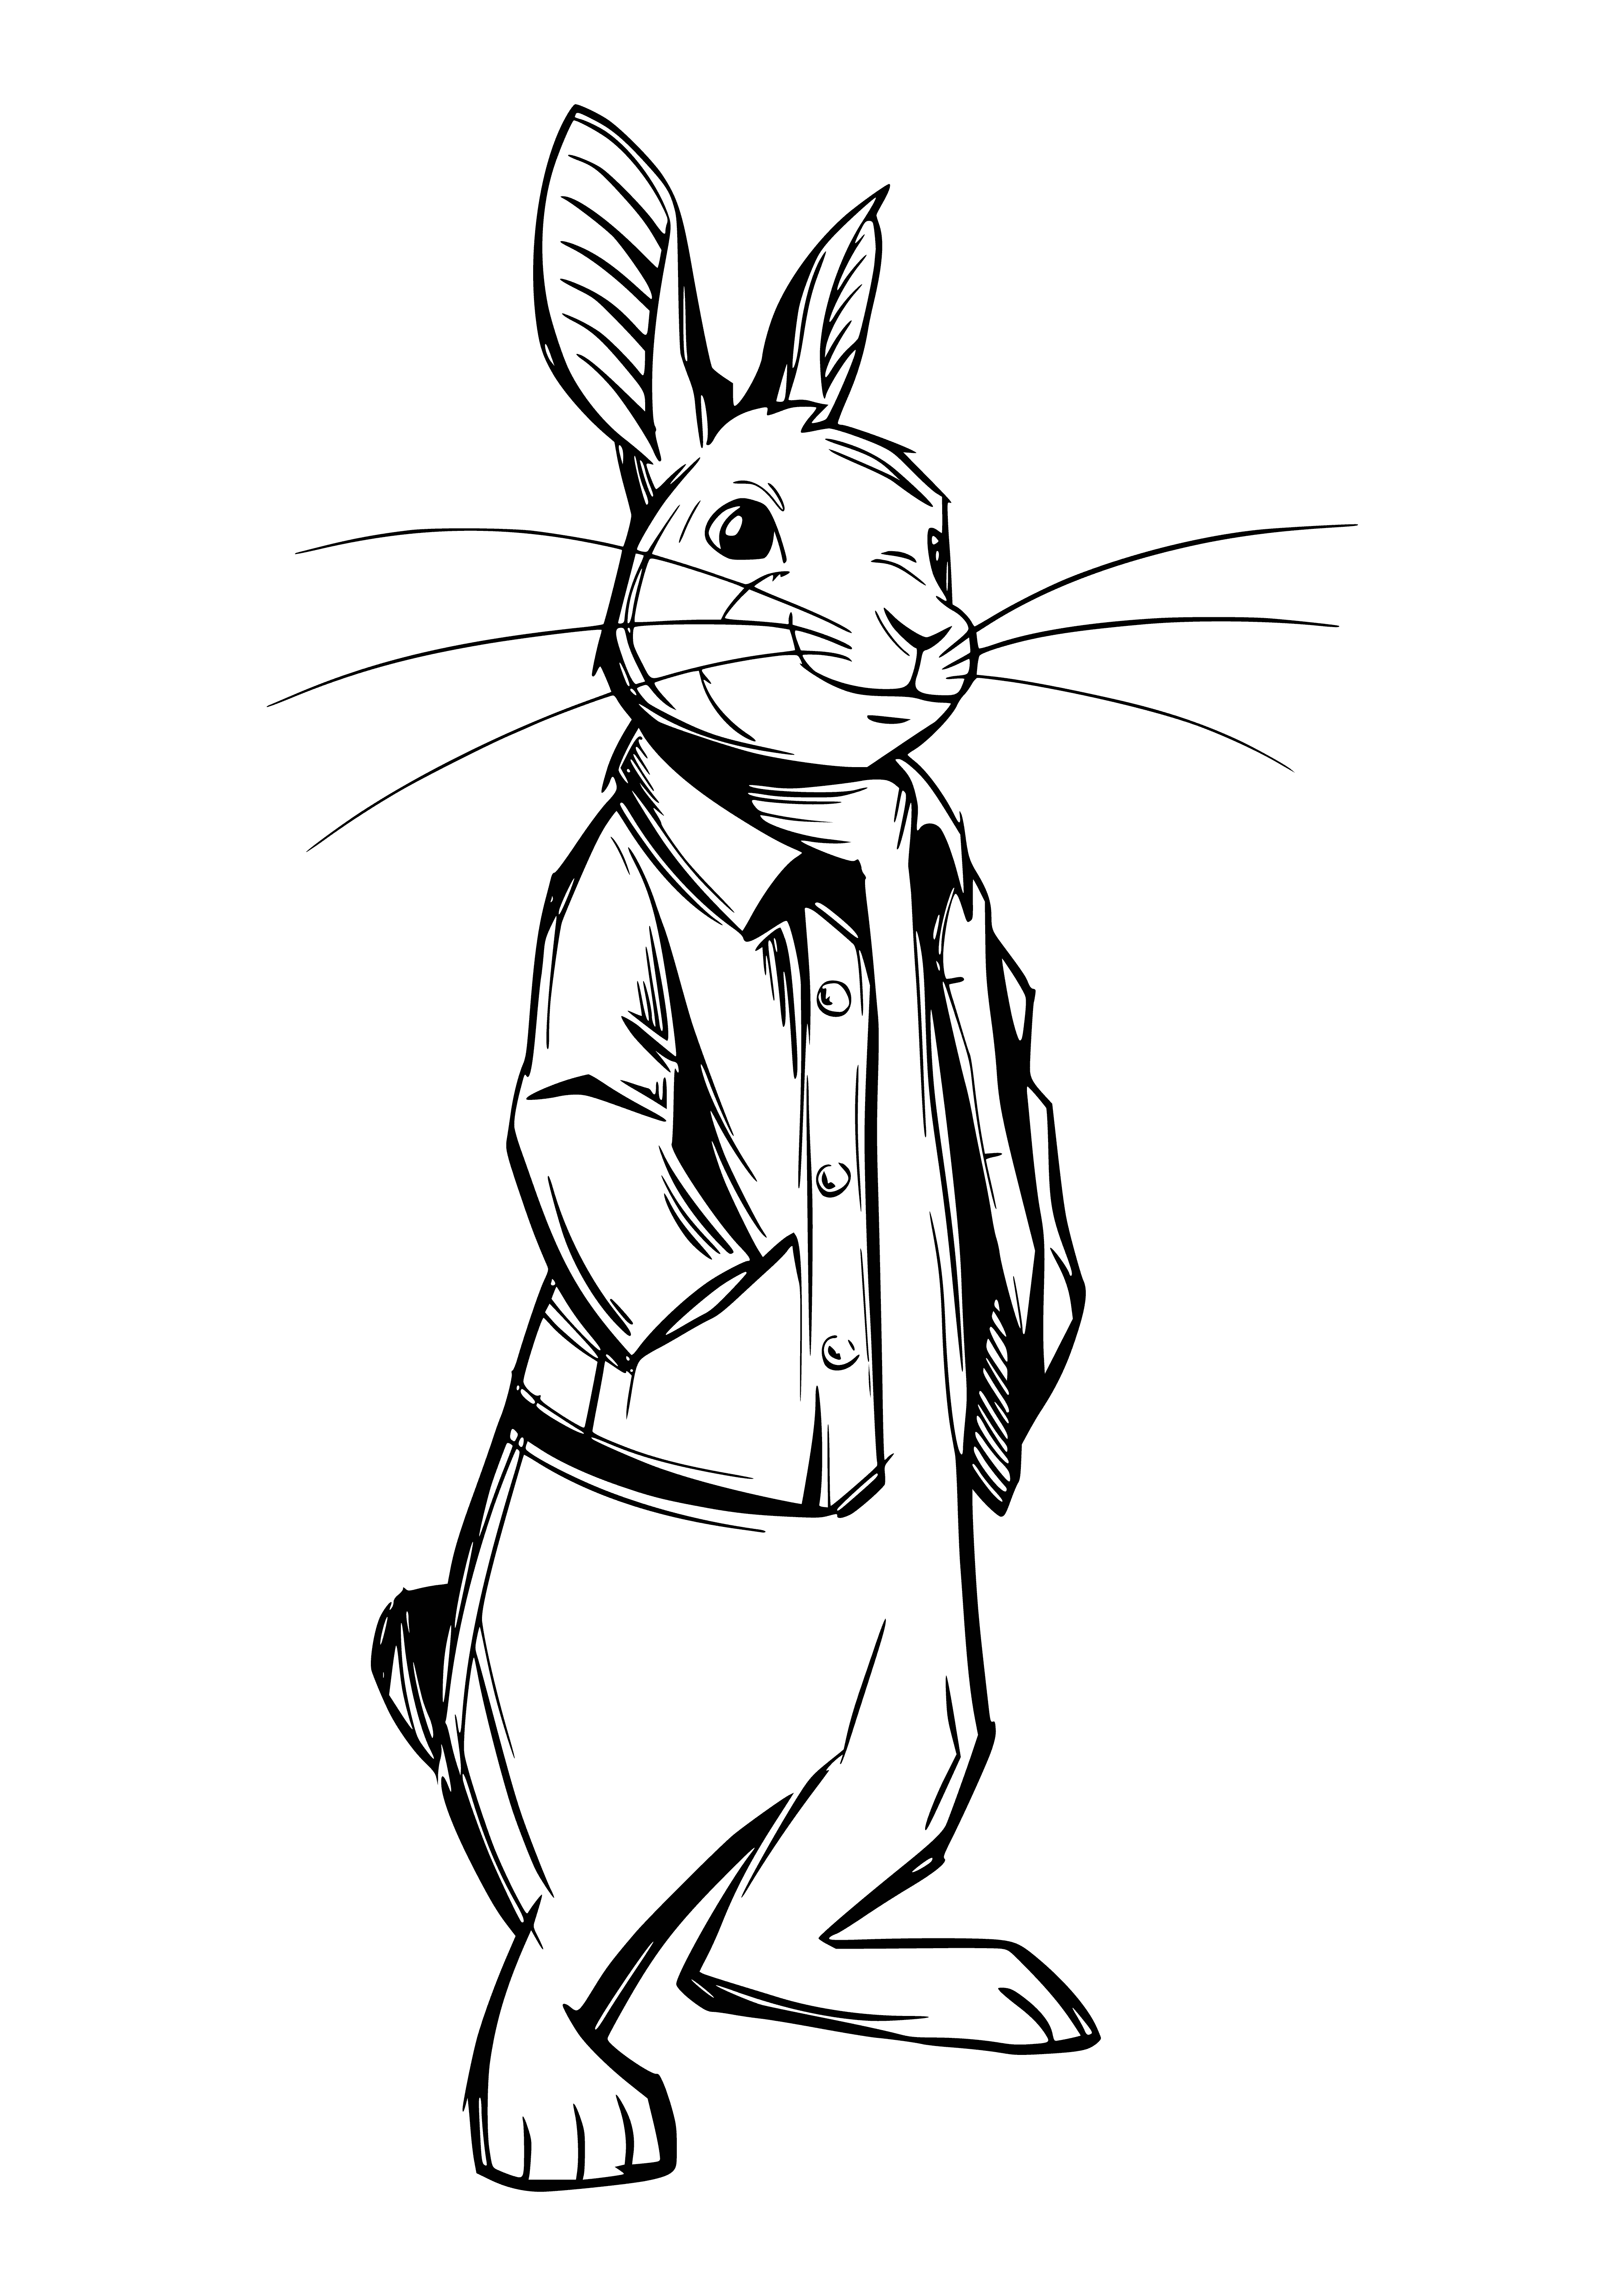 Rabbit Peter coloring page